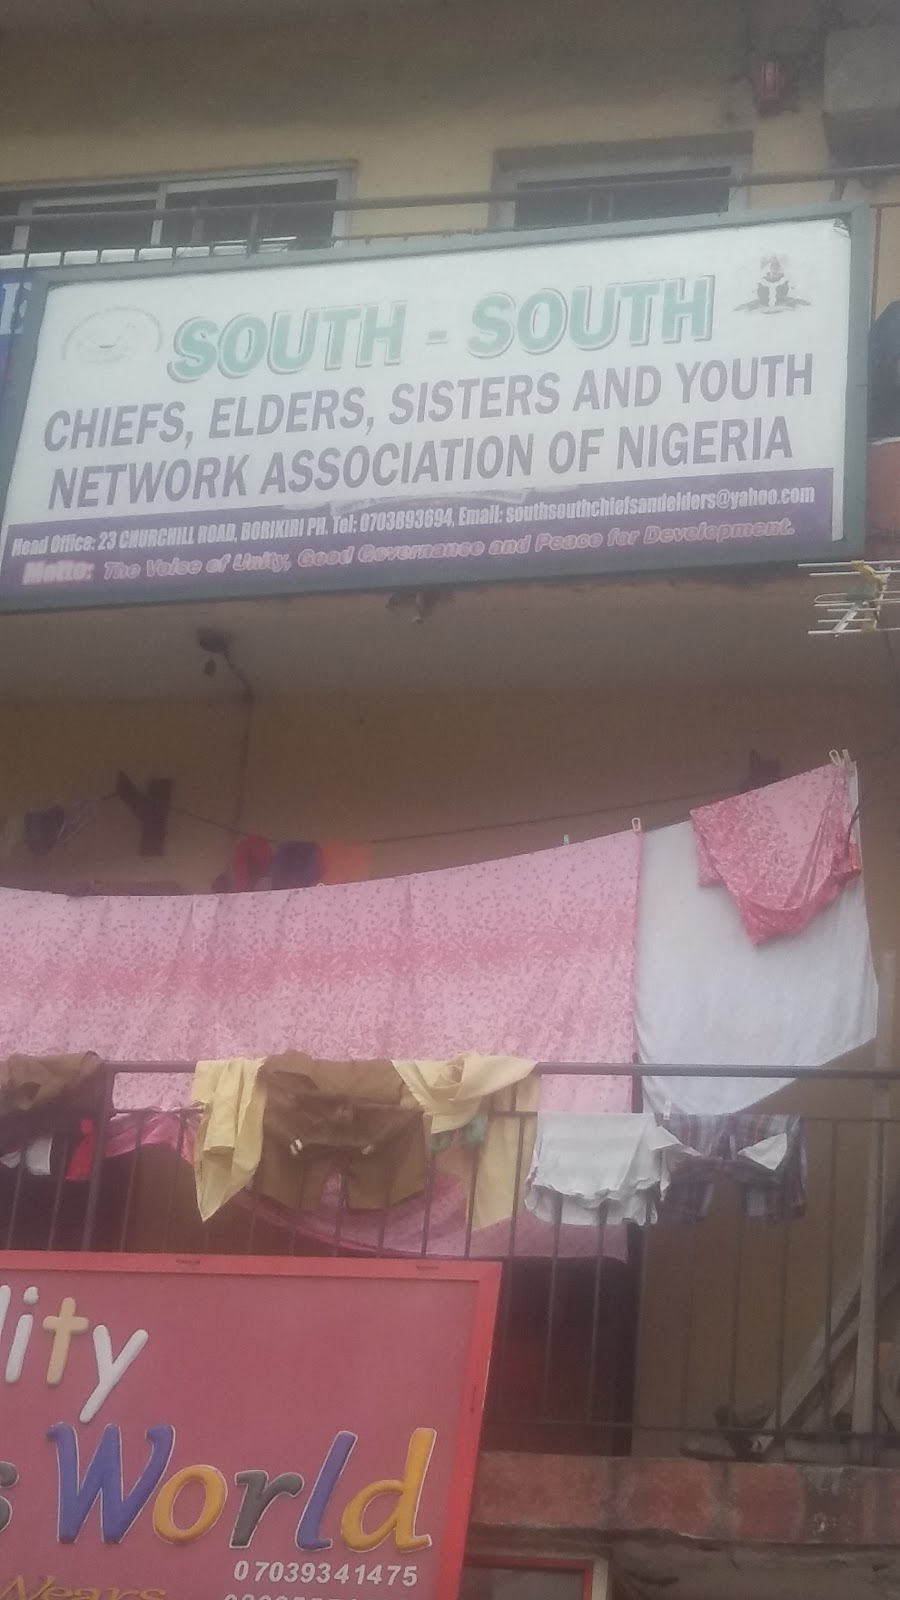 South - South Chiefs, Elders, Sisters And Youth Network Association Of Nigeria